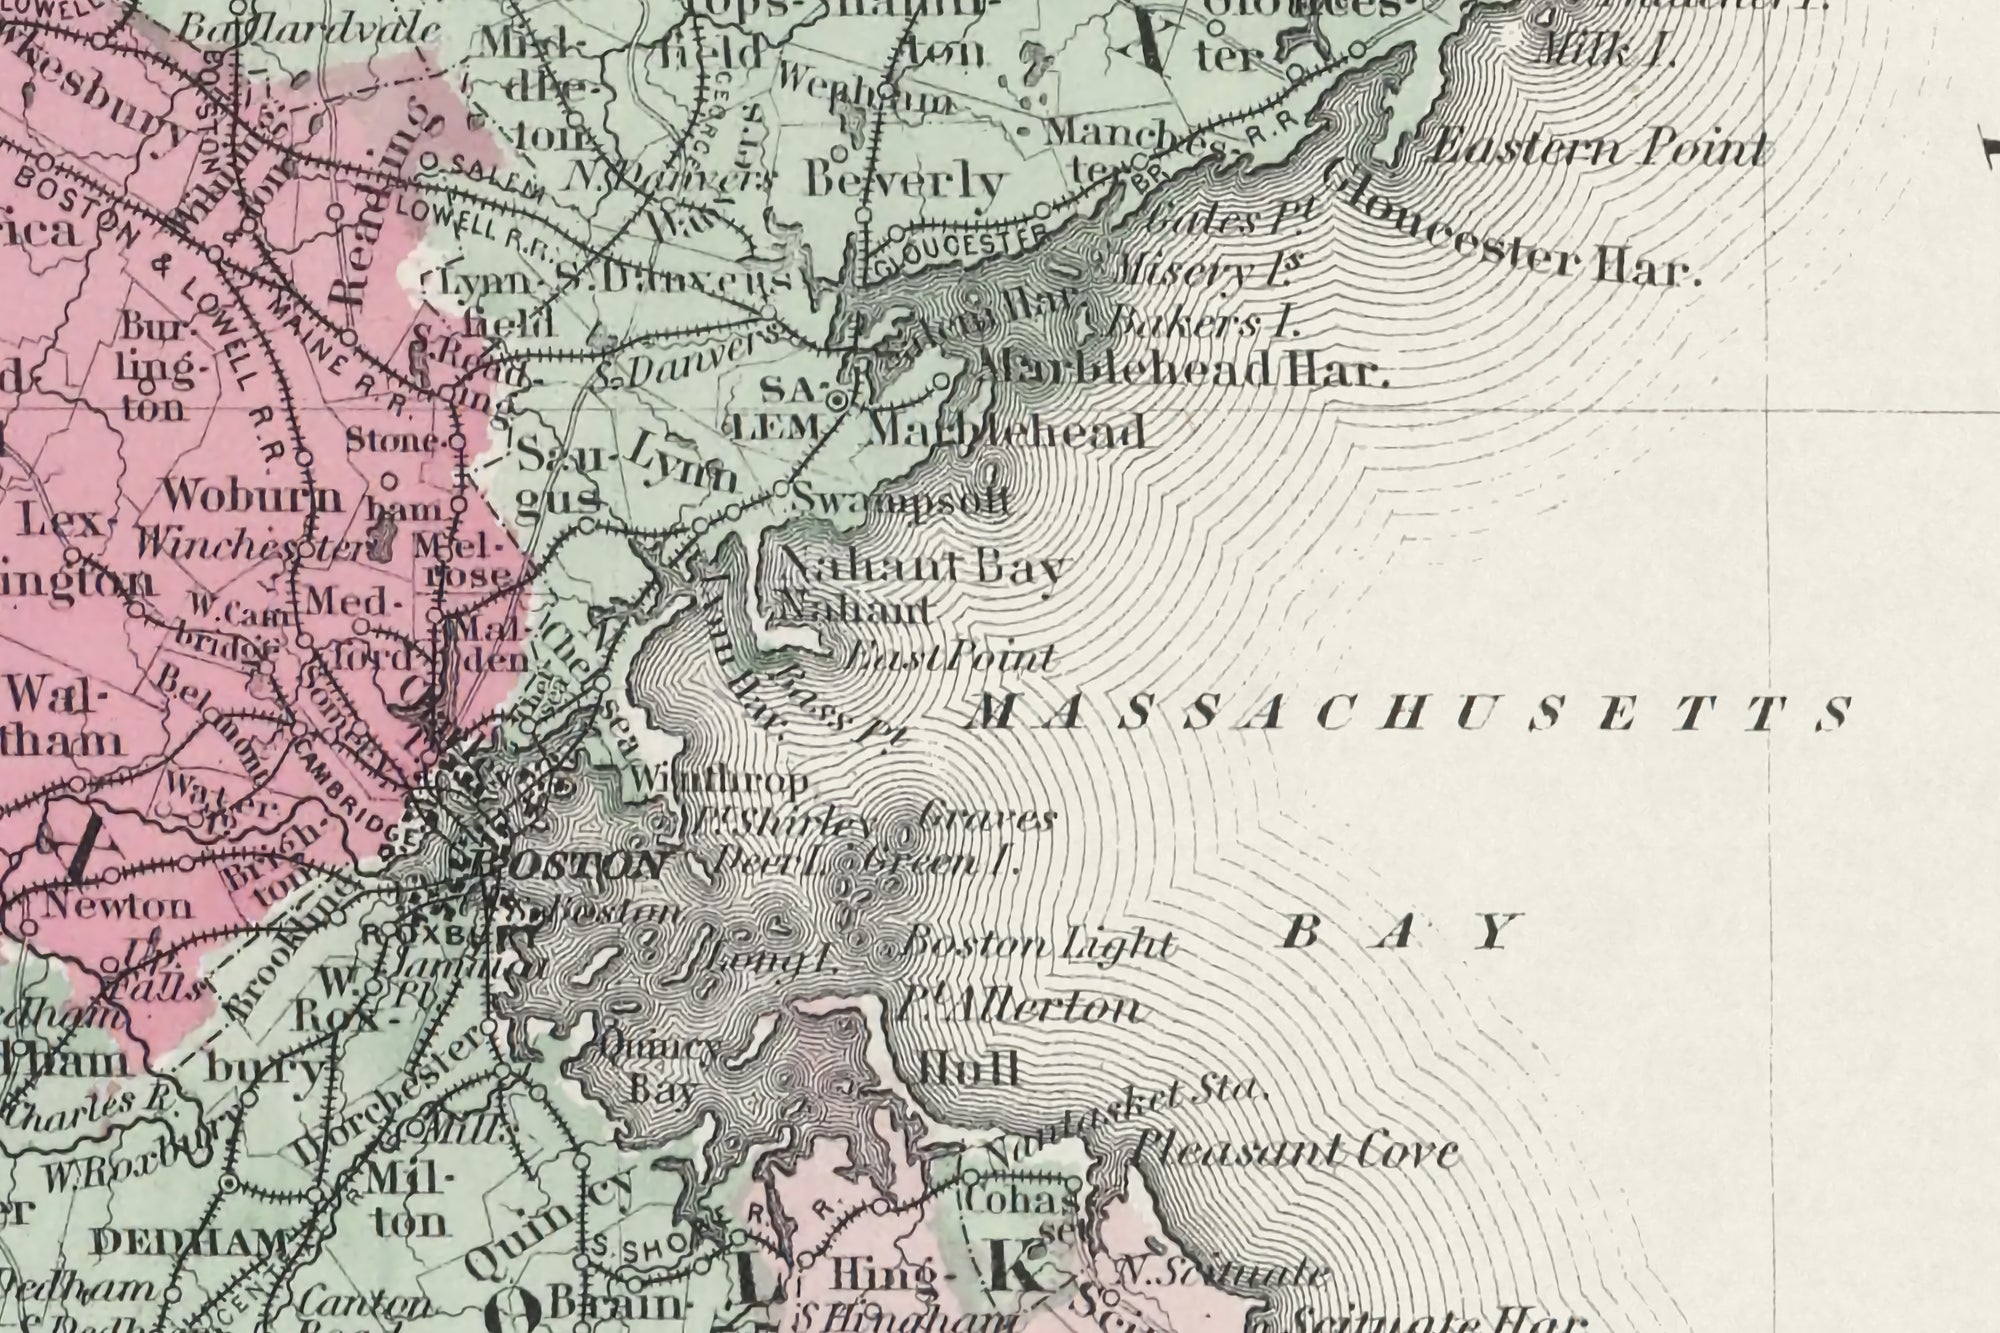 old map of rhode island